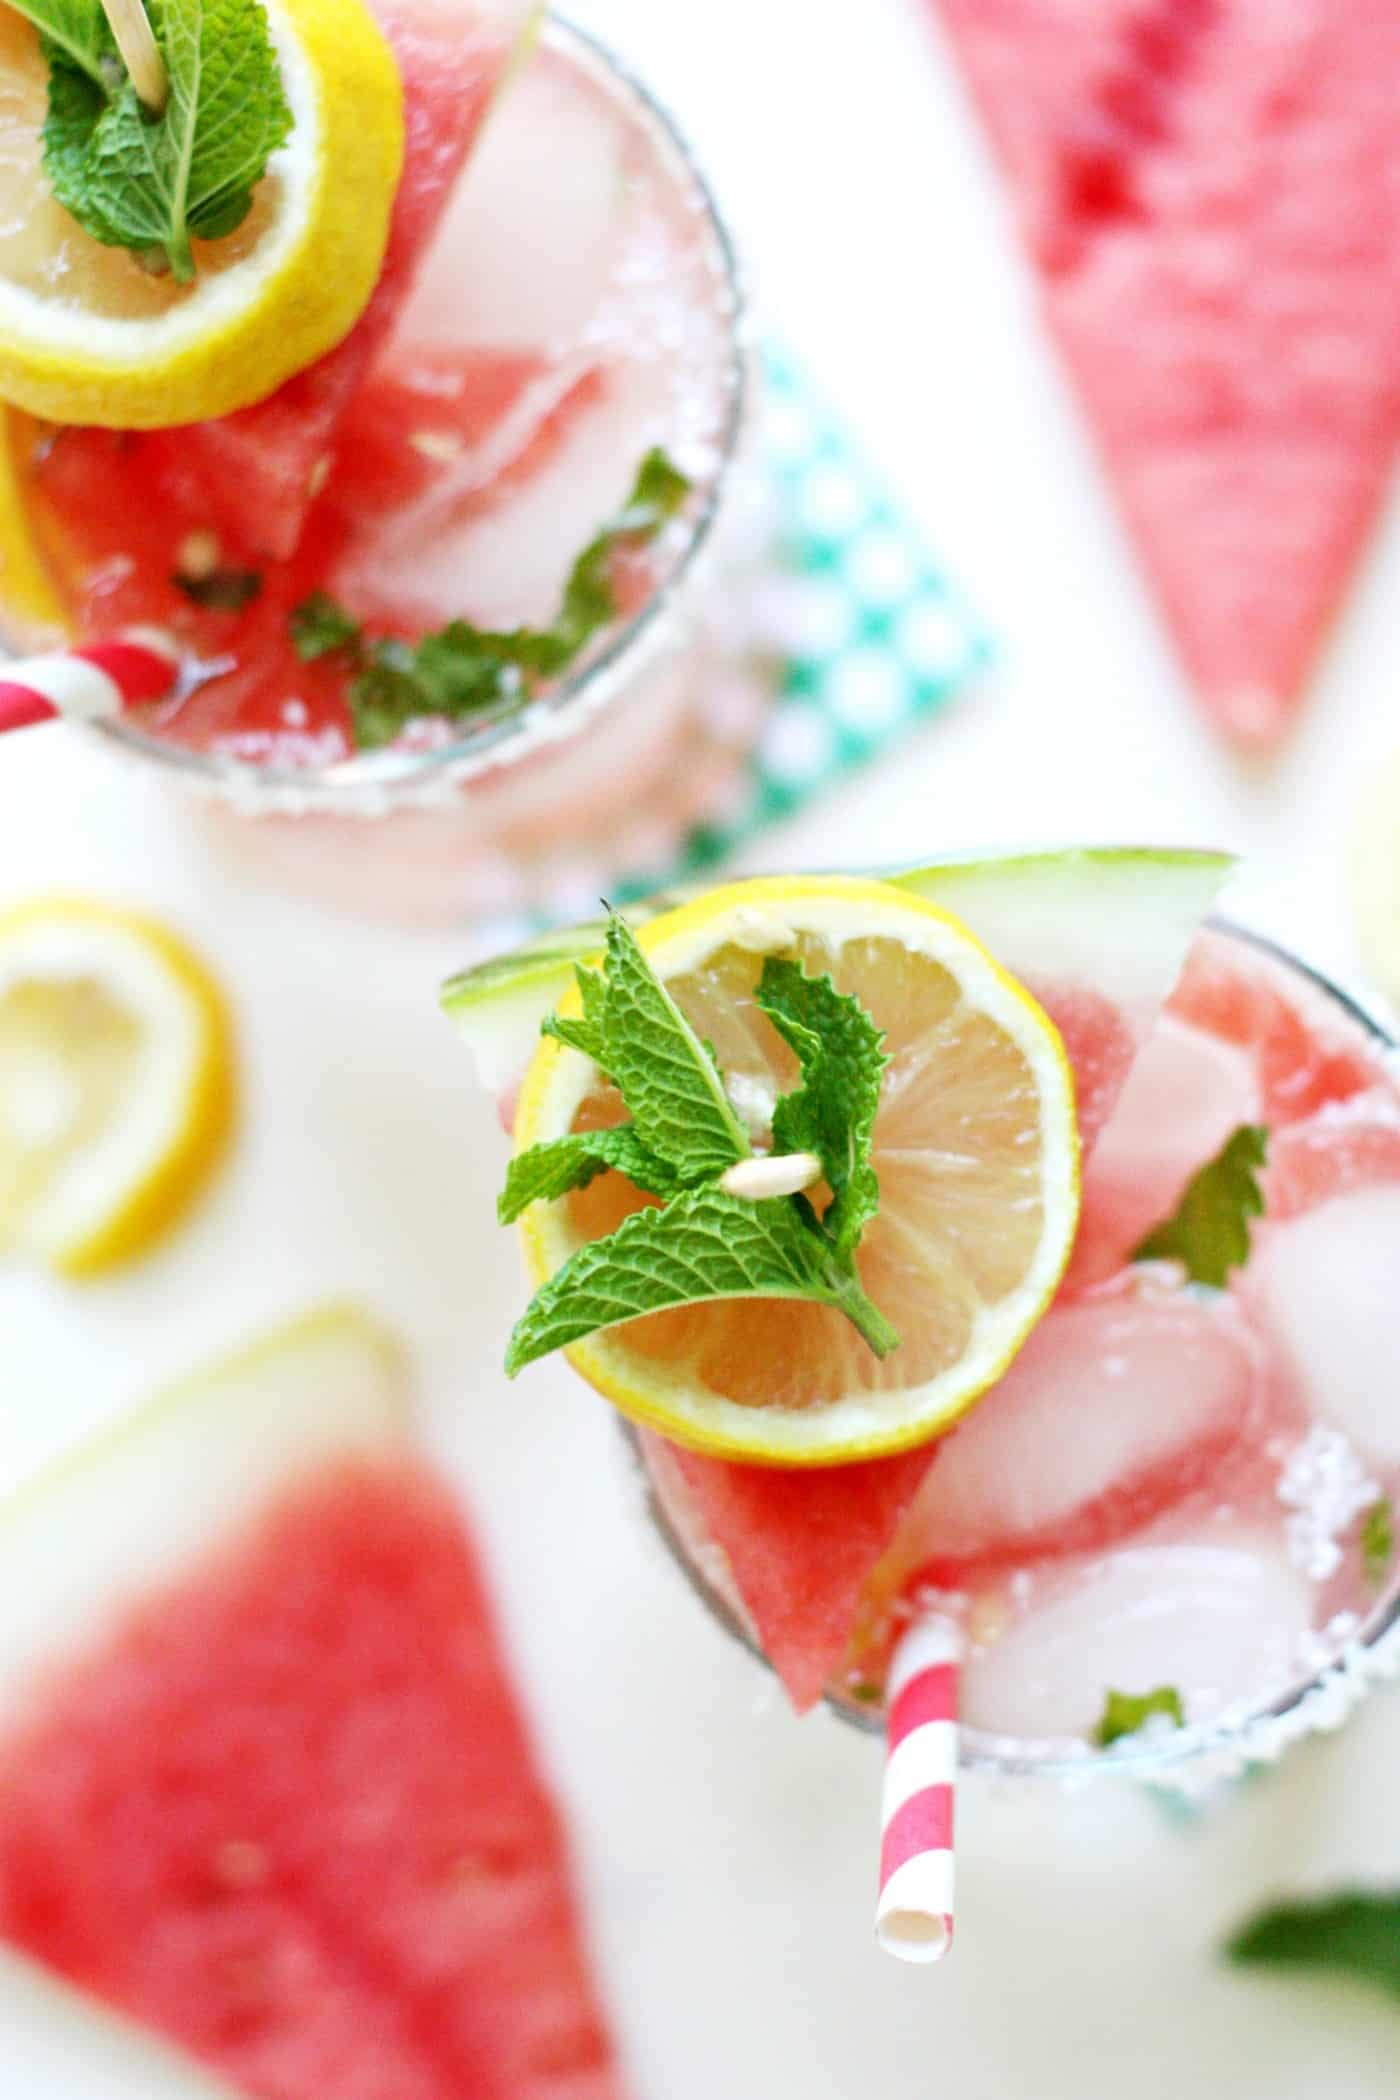 This homemade lemonade recipe combines some of the most delicious flavors of summer: sweet watermelon, tart lemon, and the cool flavor of mint!